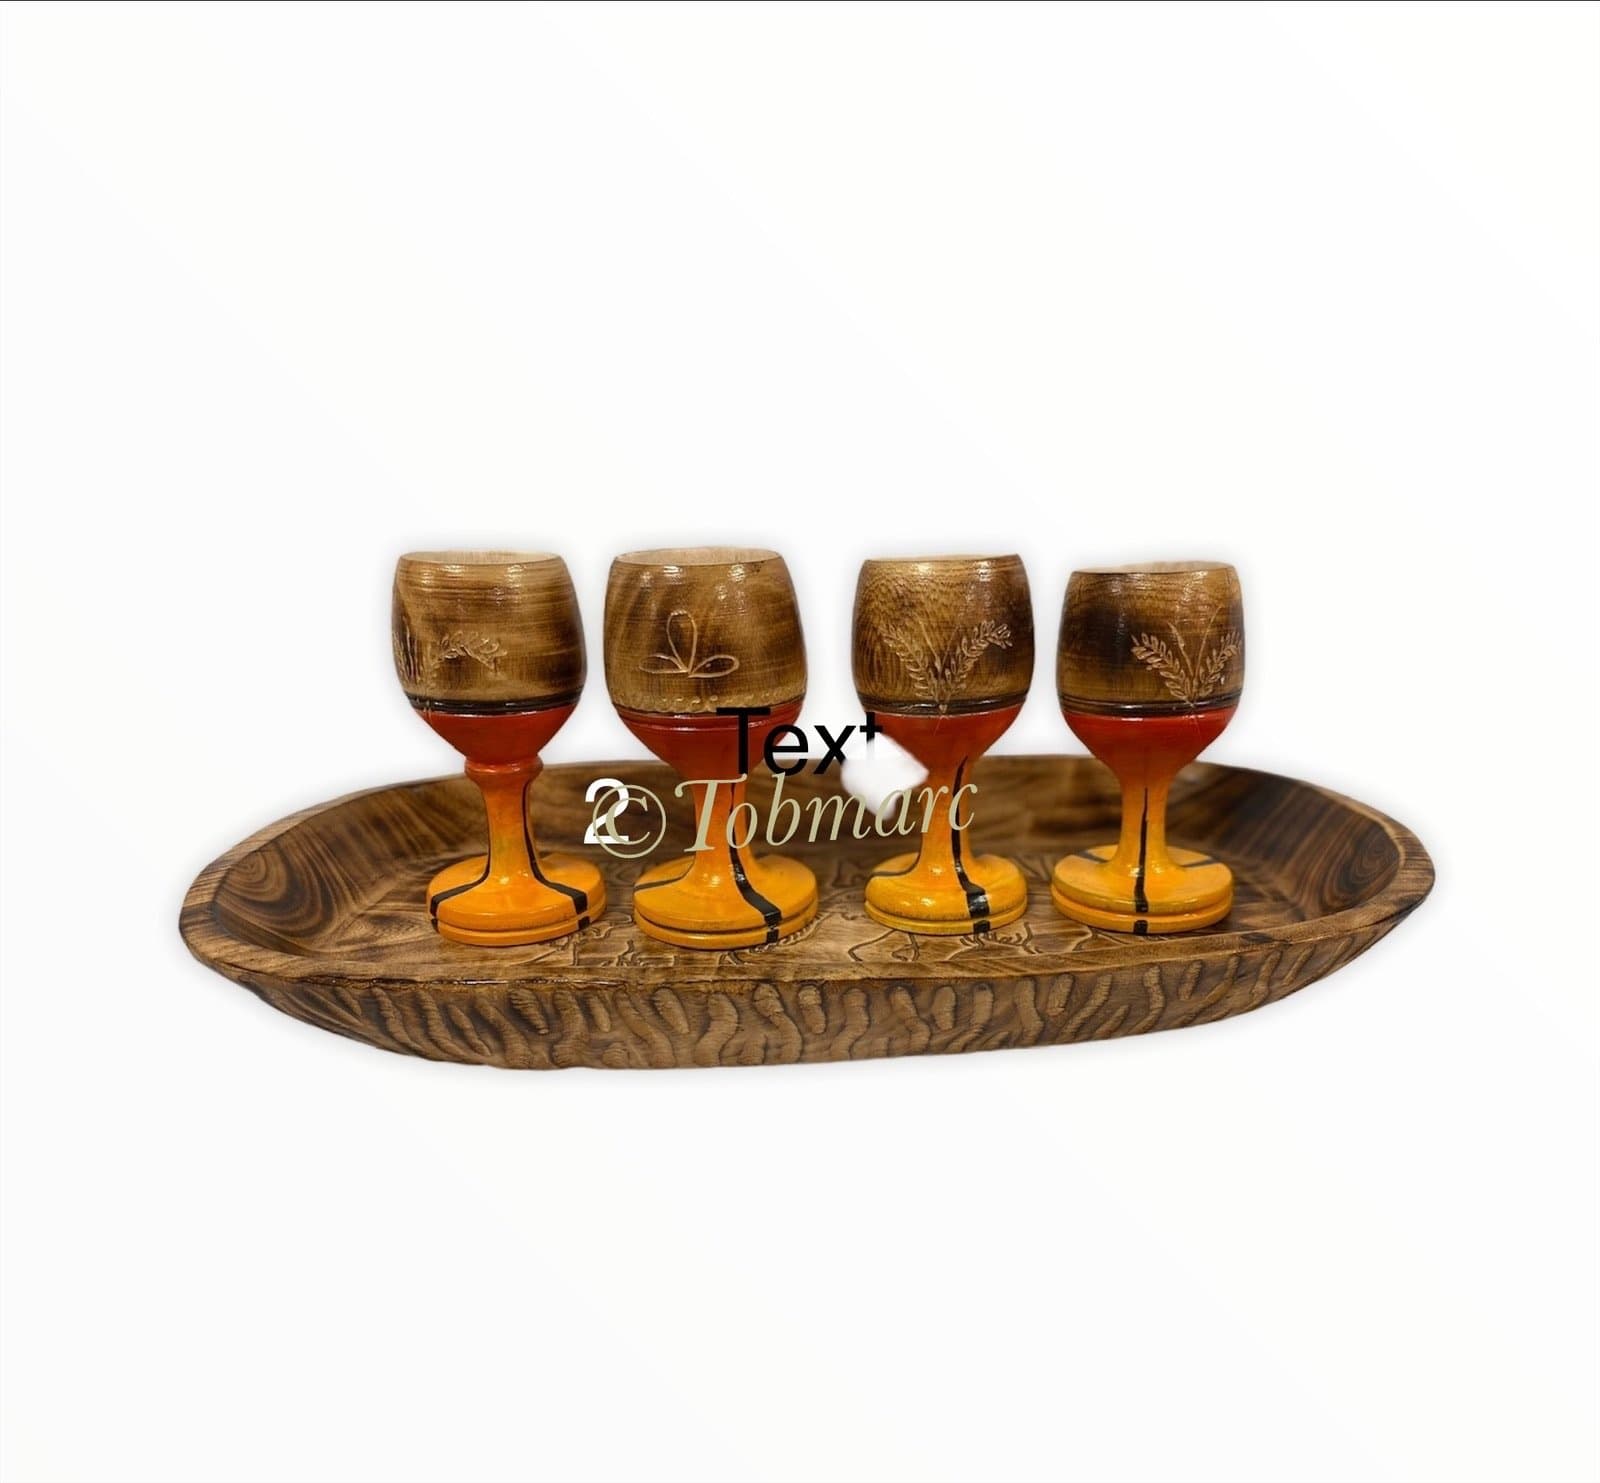 Tobmarc Home Decor & Gifts  Personalised wooden painted wine glass